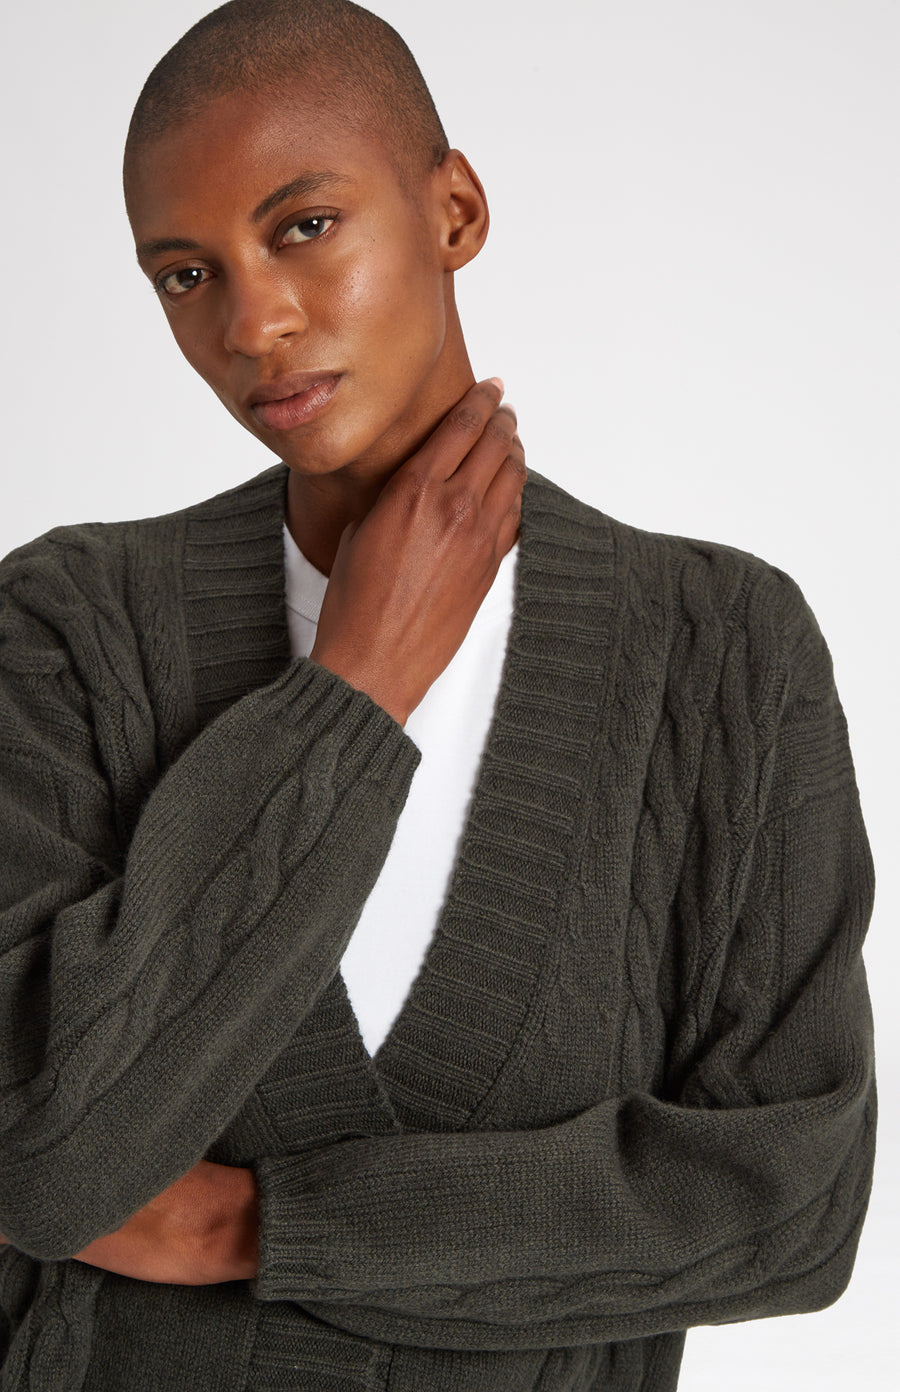 Superfine Wool Cardigan with Cable detail in Khaki on model - Pringle of Scotland